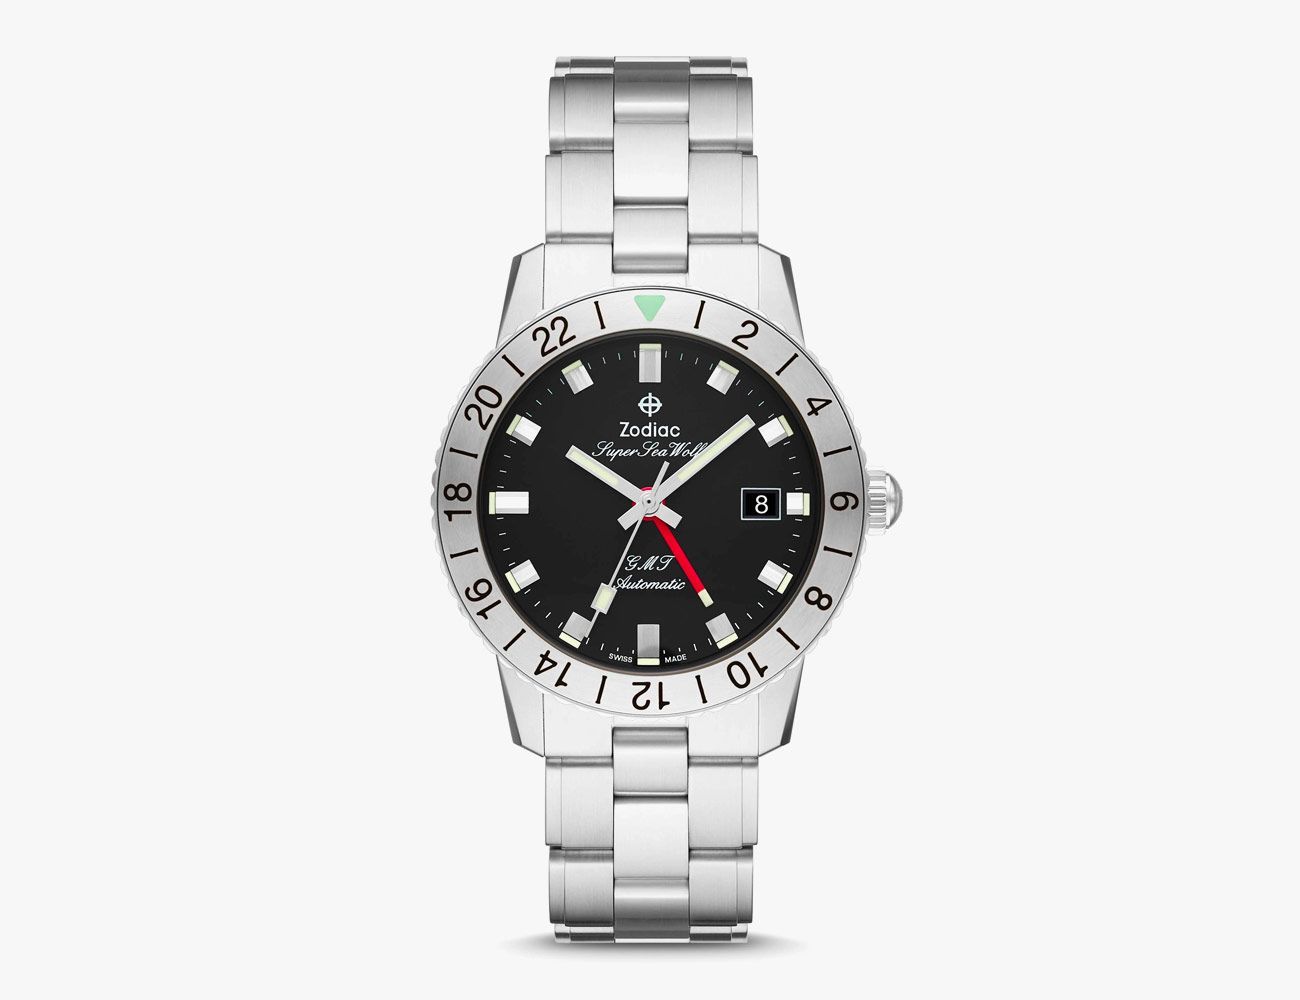 The Best GMT Watches for Travel